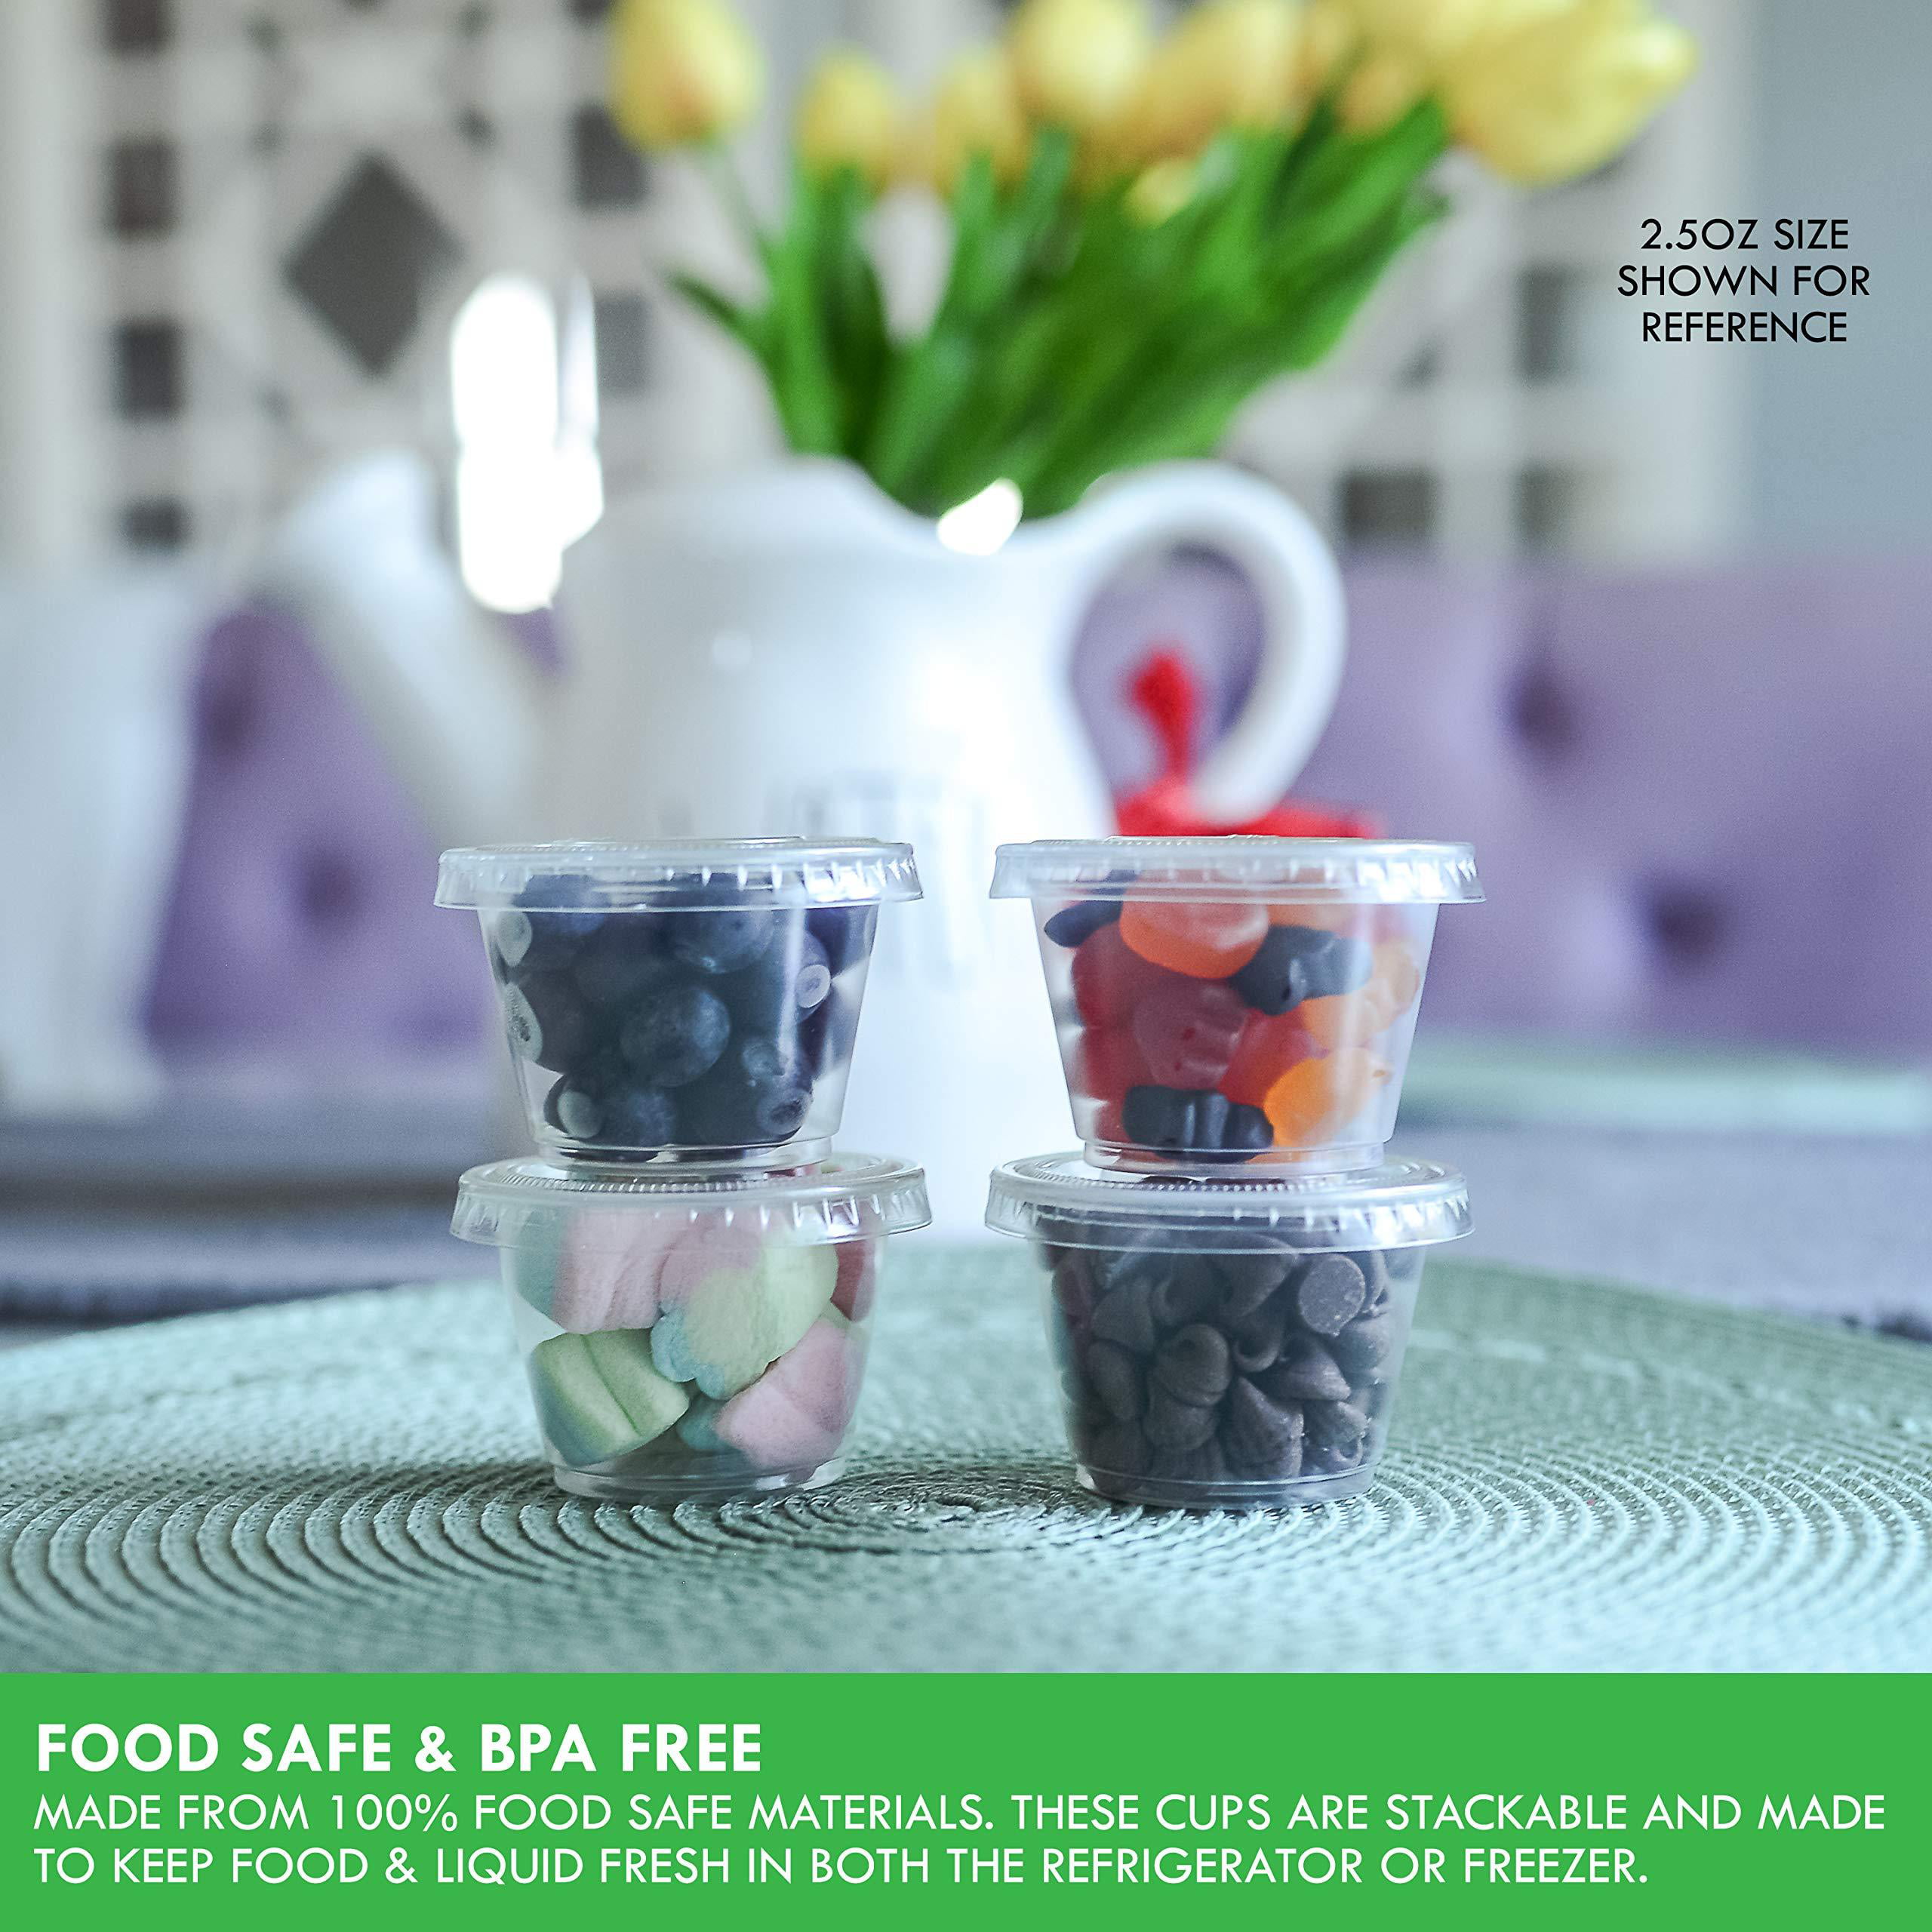 Freshware Plastic Portion Cups with Lids 4 Ounce, 100 Sets Souffle Cups,  Jello Shot Cups, Condiment Sauce Containers For Sampling, Sauce, Snack or  Dressing 4 oz.